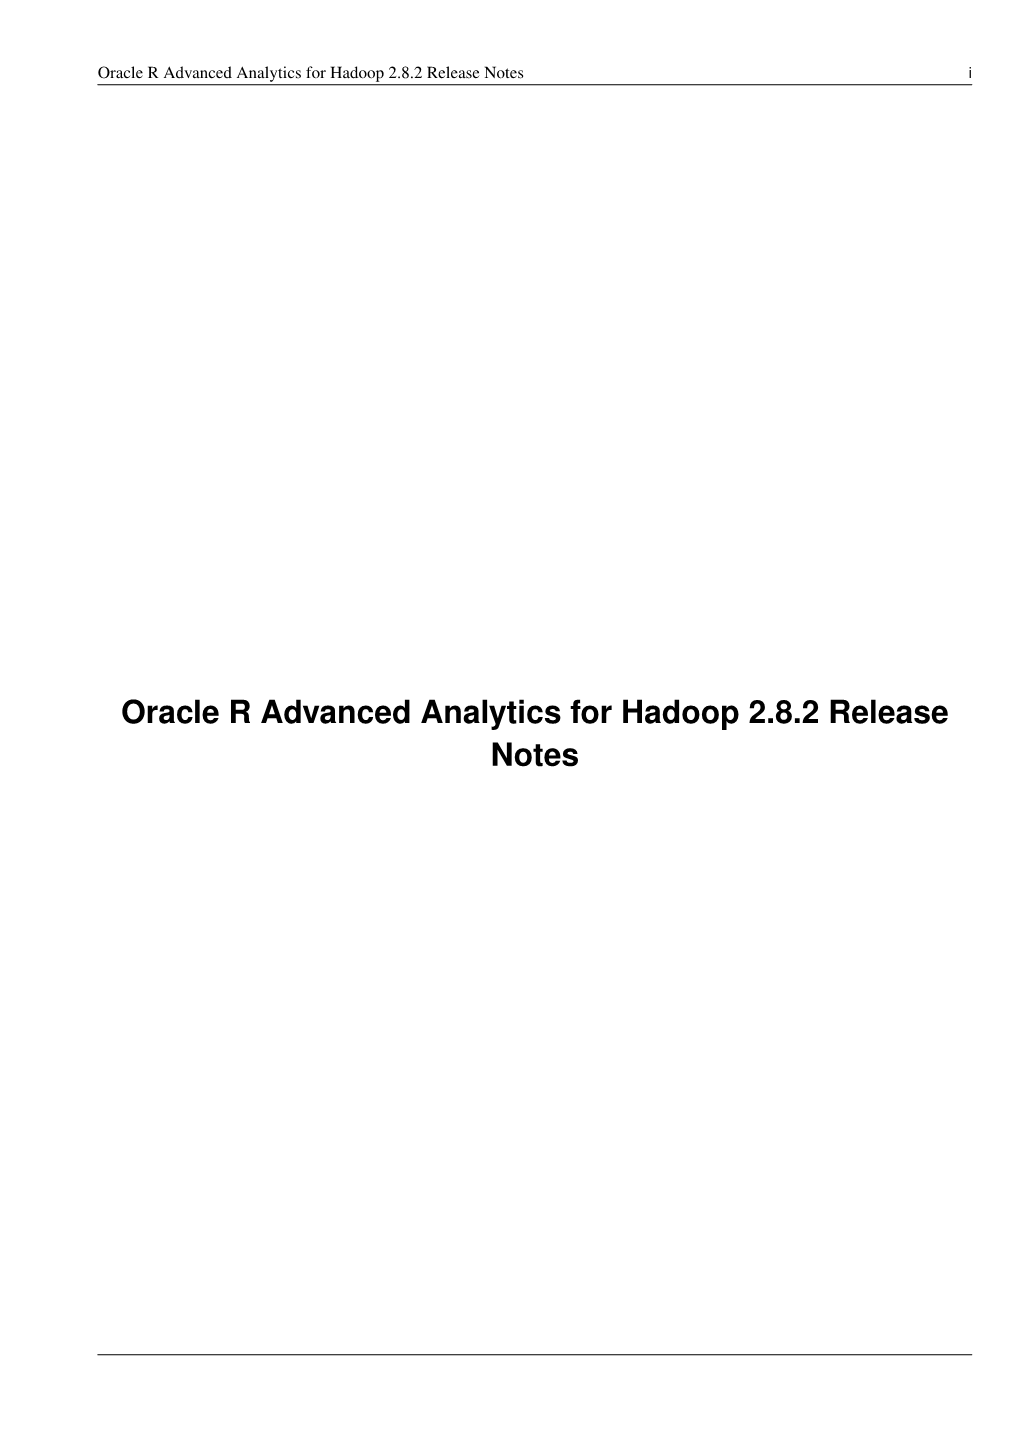 Oracle R Advanced Analytics for Hadoop 2.8.2 Release Notes I